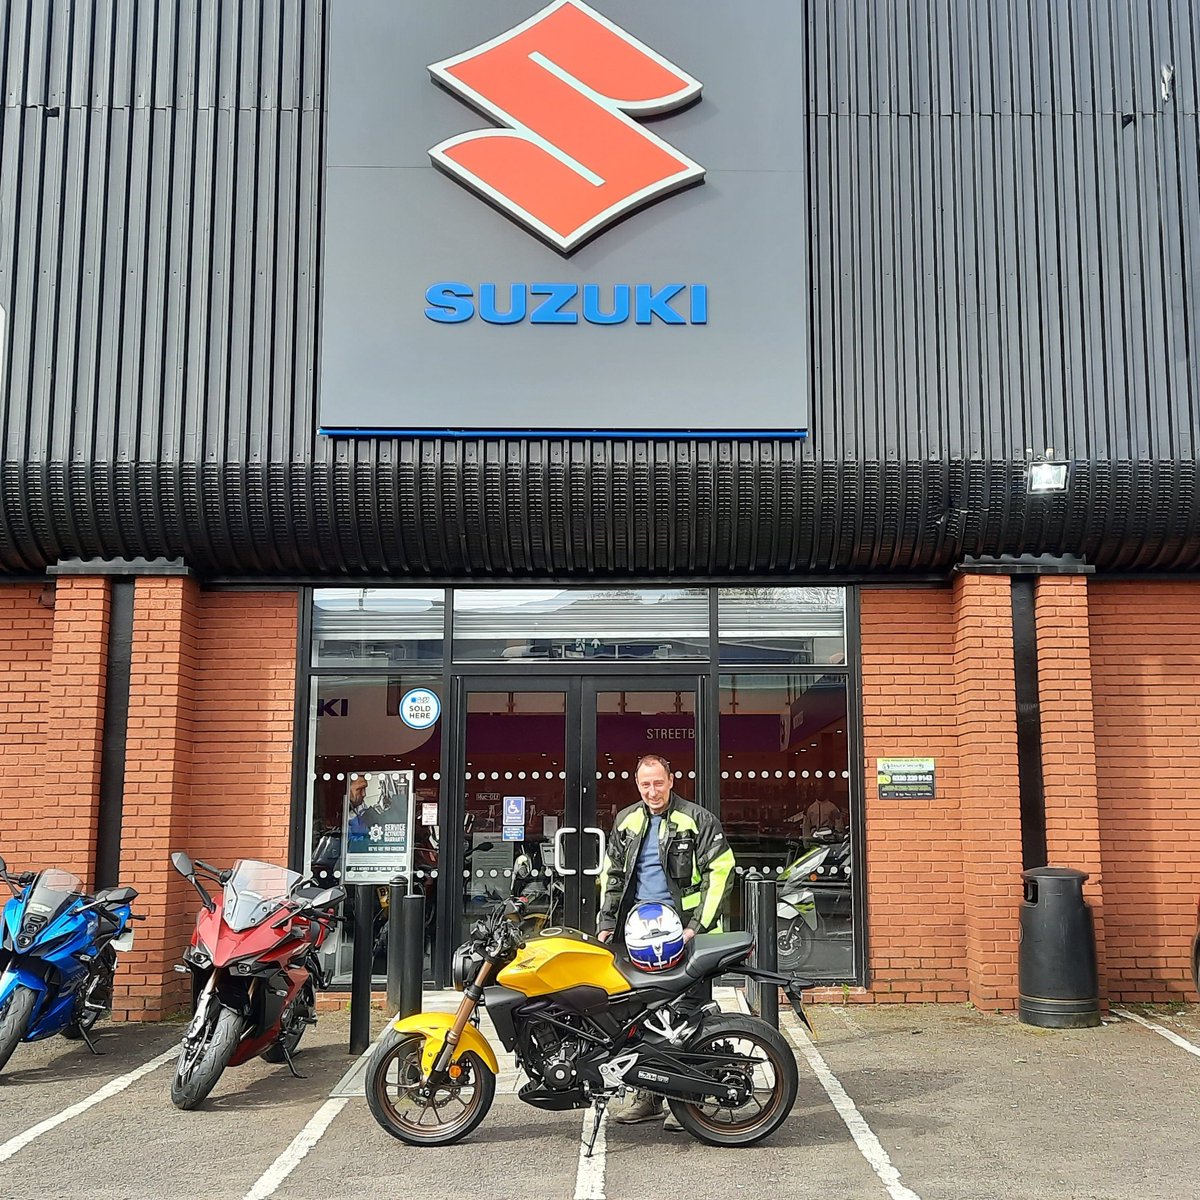 Nice Morning for a Hand Over

Andrew enjoy your Honda CB300R and have many Happy Miles of fun riding

#Streetbike #Honda #CB300R #QualityUsed #HappyMiles